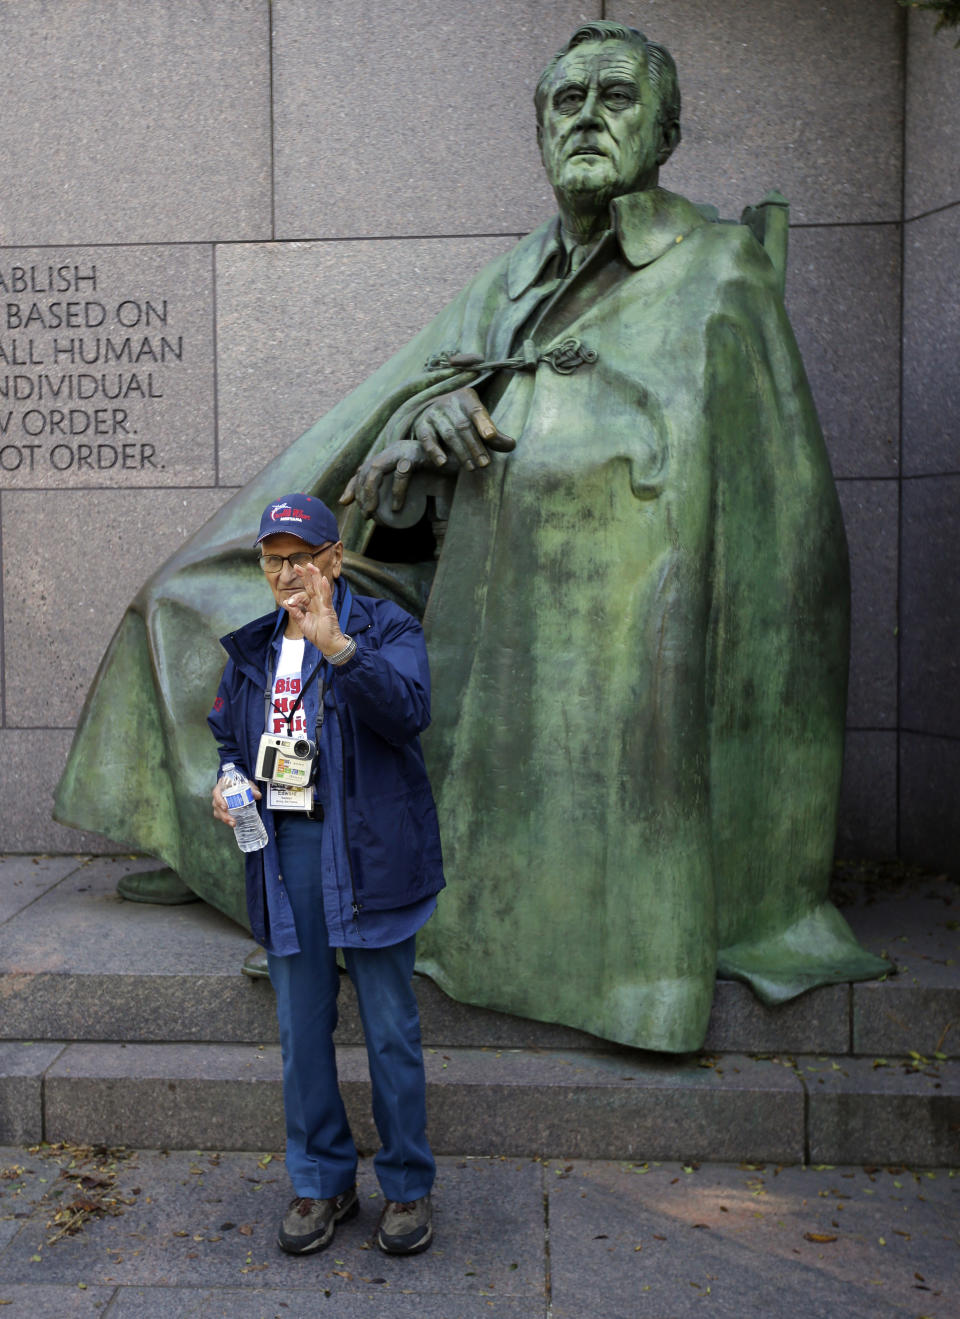 Edward Swetish of Helena, Mont., a WWII veteran, poses for a photograph in front of a statue of President Roosevelt at the Franklin Delano Roosevelt Memorial, Monday, Oct. 14, 2013, in Washington. (AP Photo/Alex Brandon)